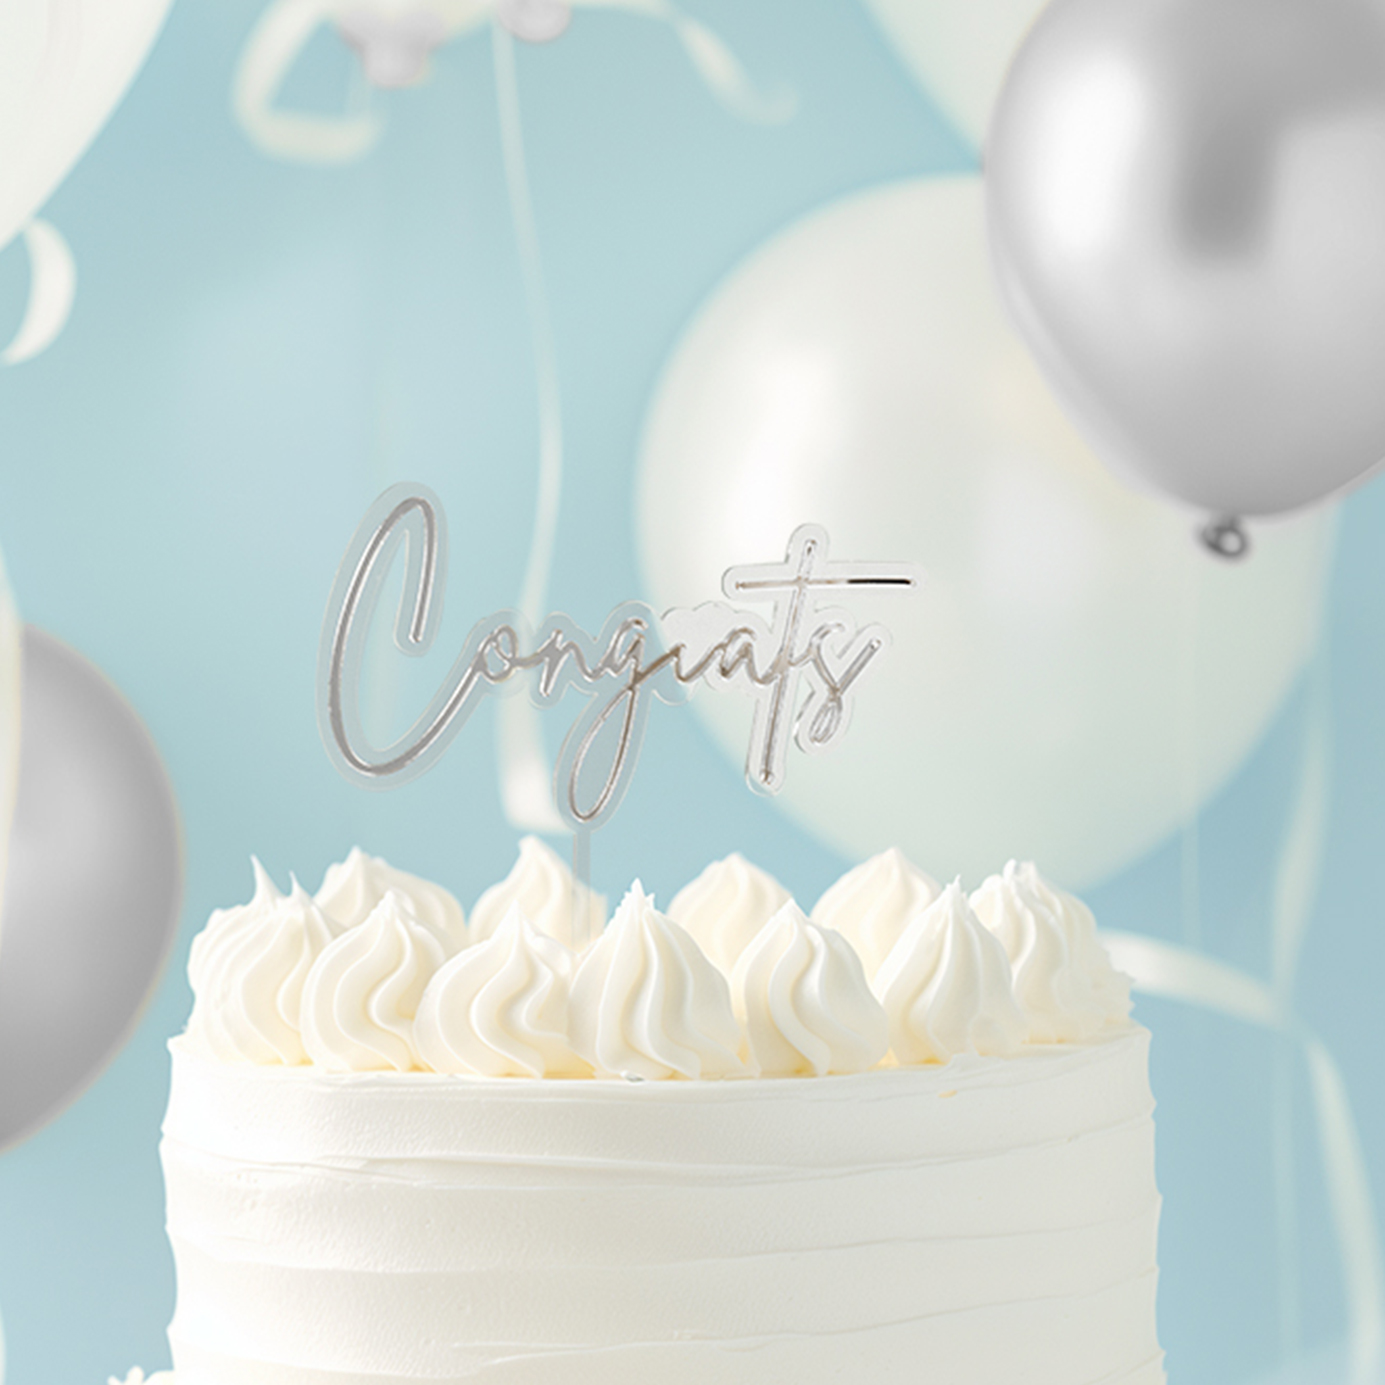 SILVER / CLEAR Layered Cake Topper - CONGRATS